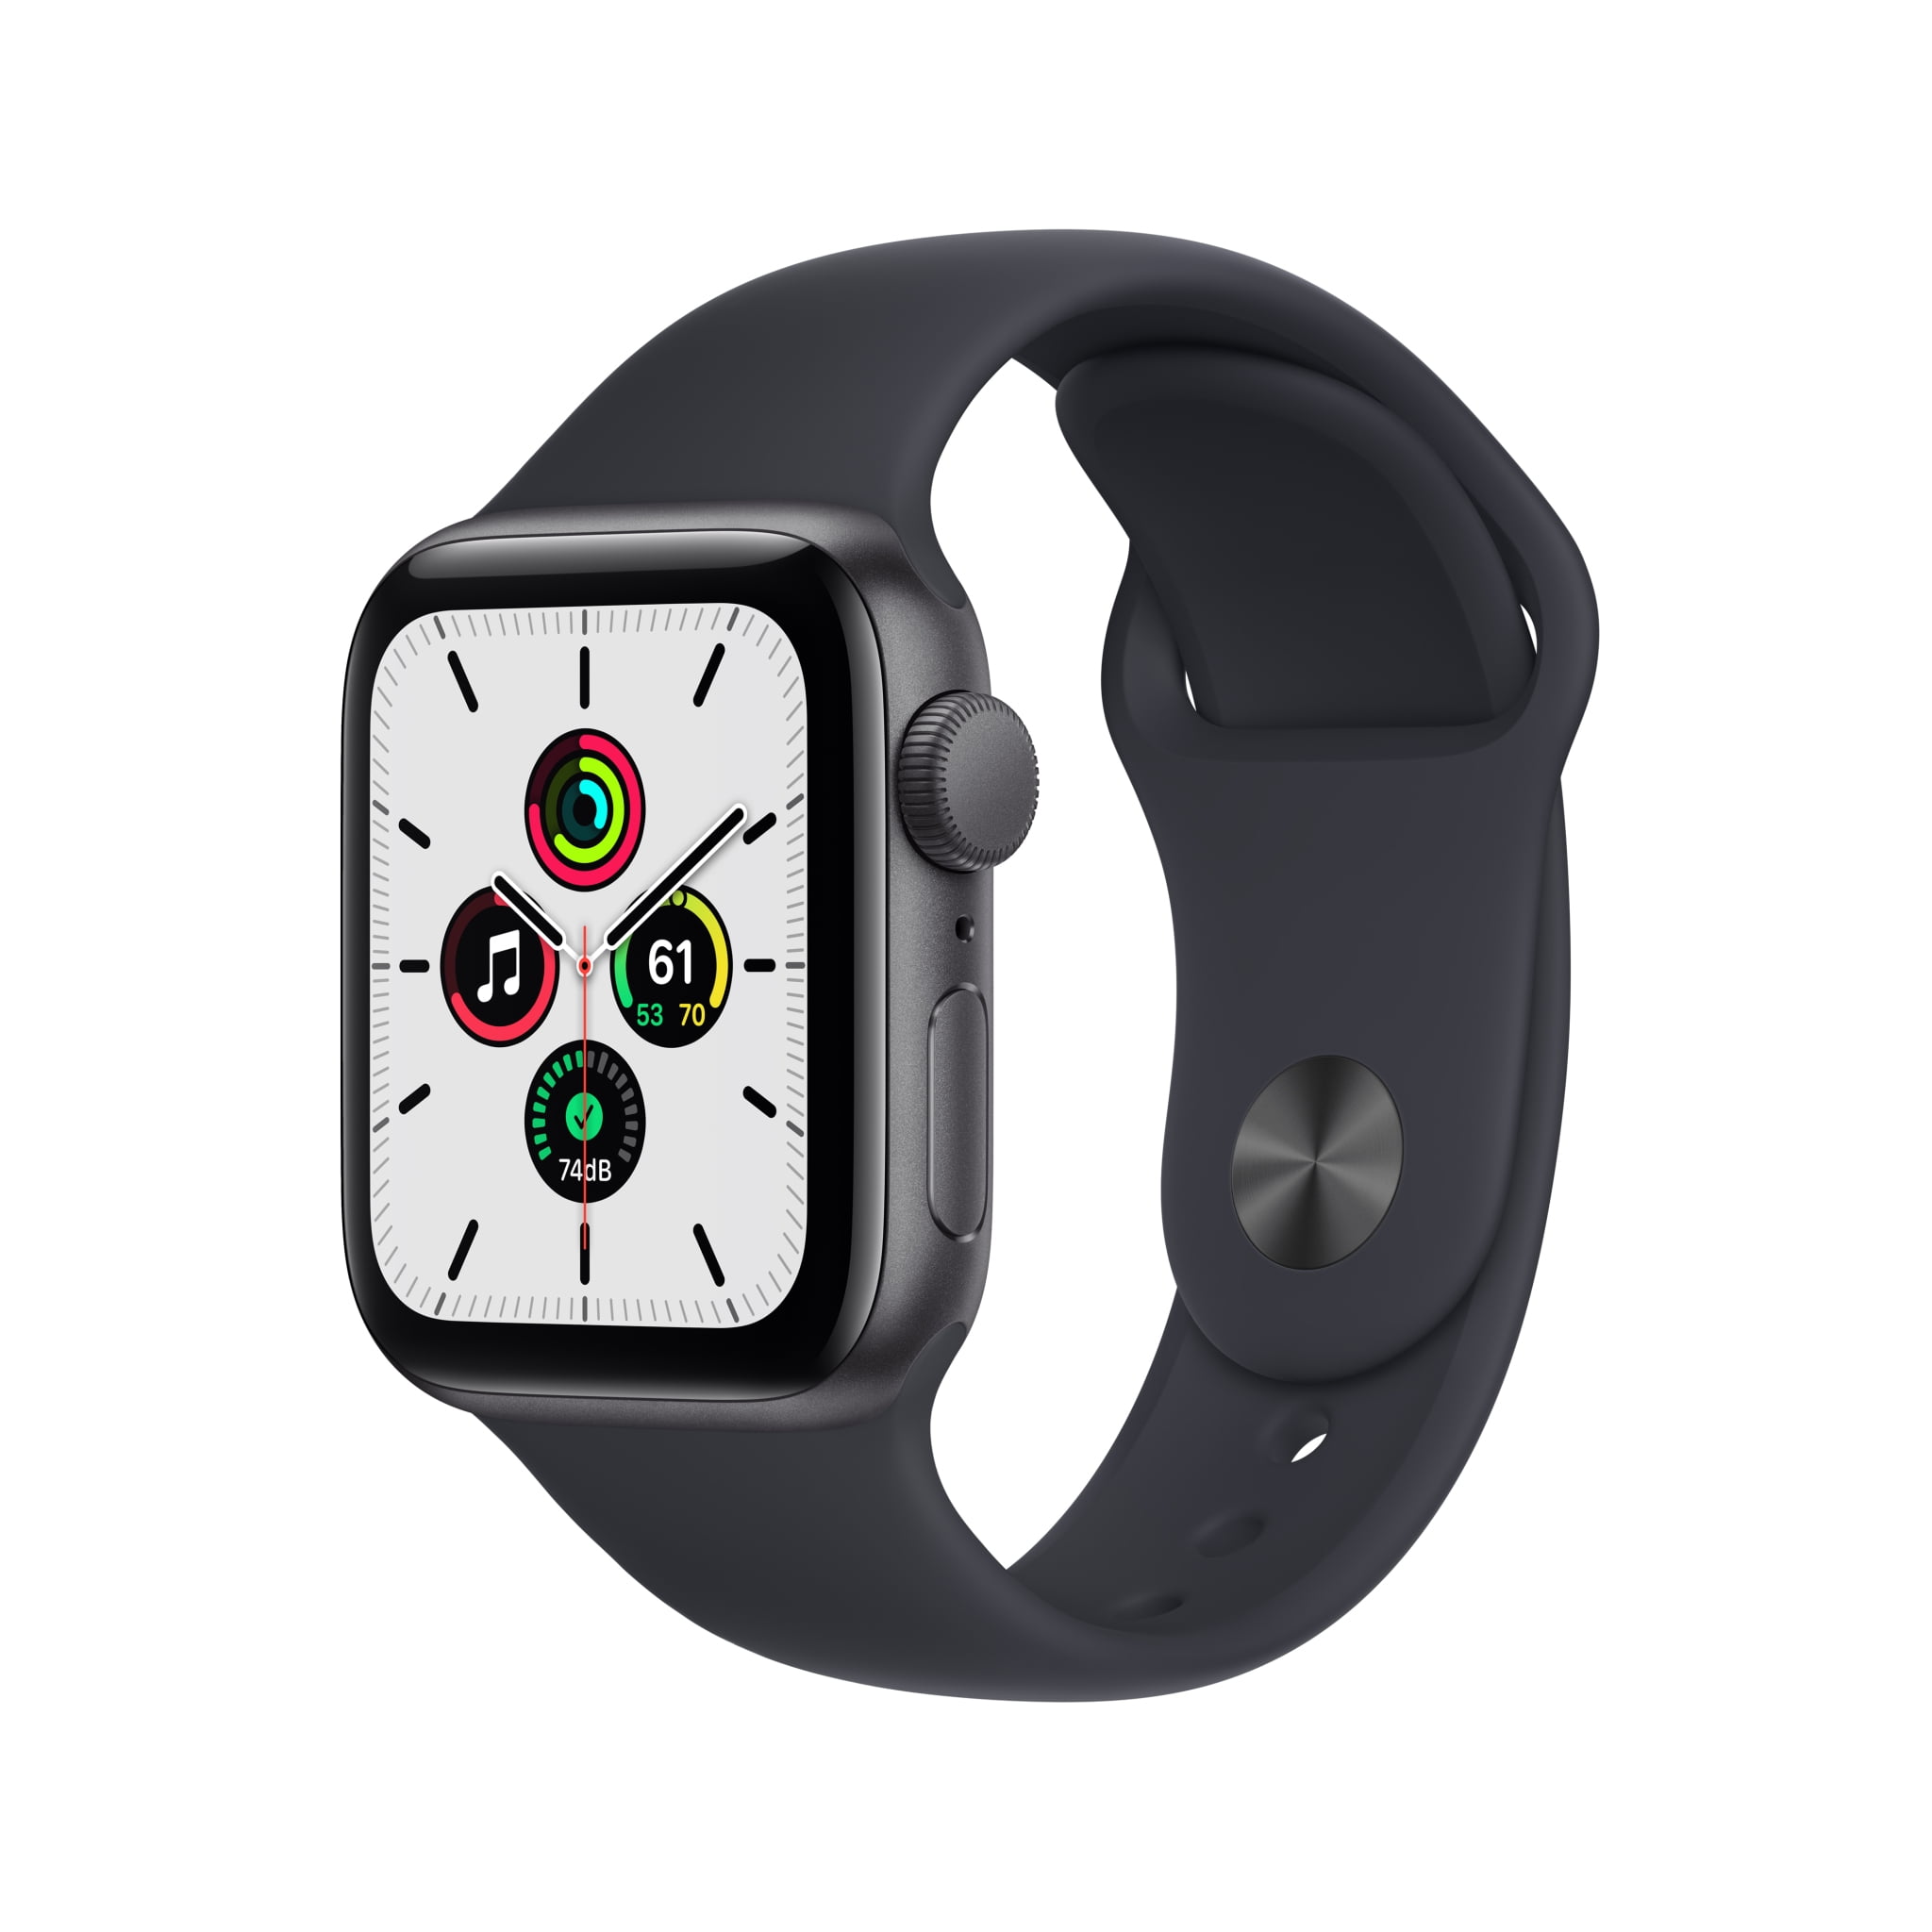 Apple Watch SE (1st Gen) GPS, 40mm Space Gray Aluminum Case with Midnight Sport Band